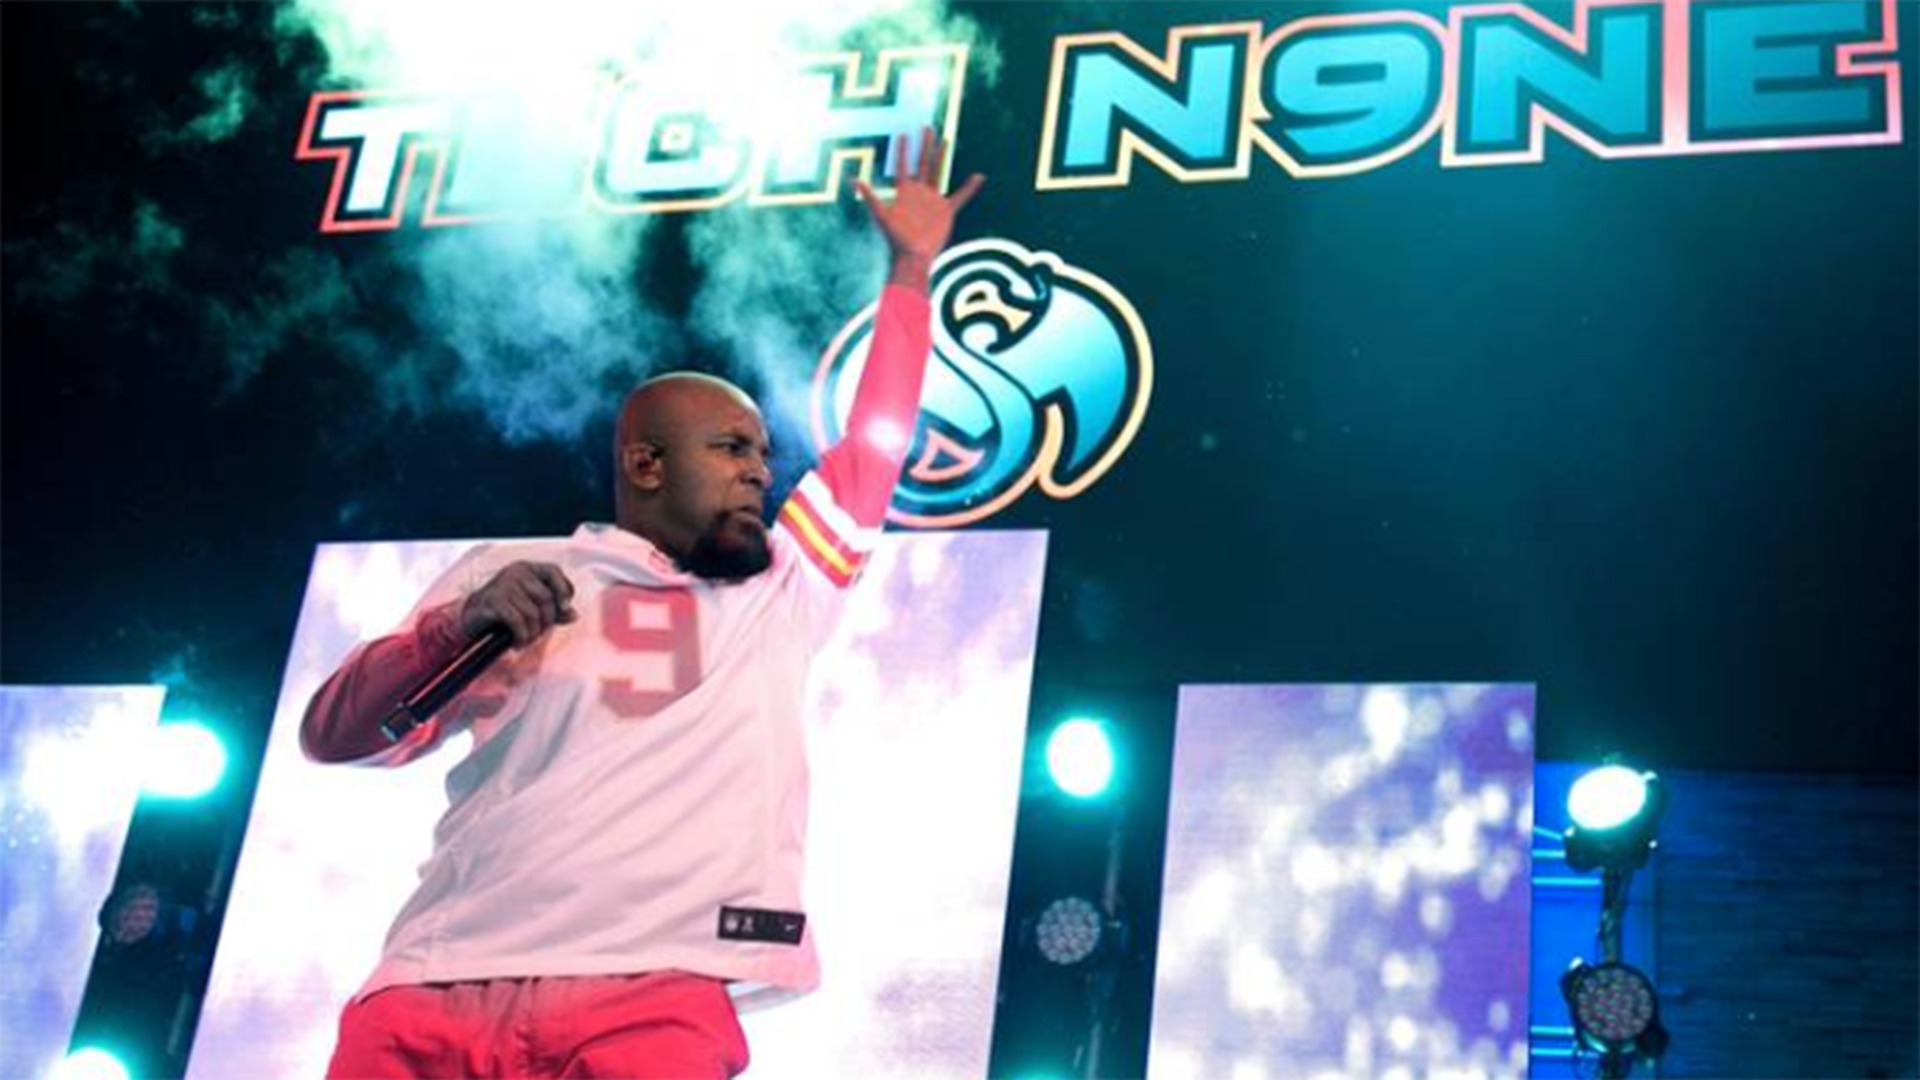 A fan raises his arms in front of a blue sign that reads "Tech N9NE" overhead.